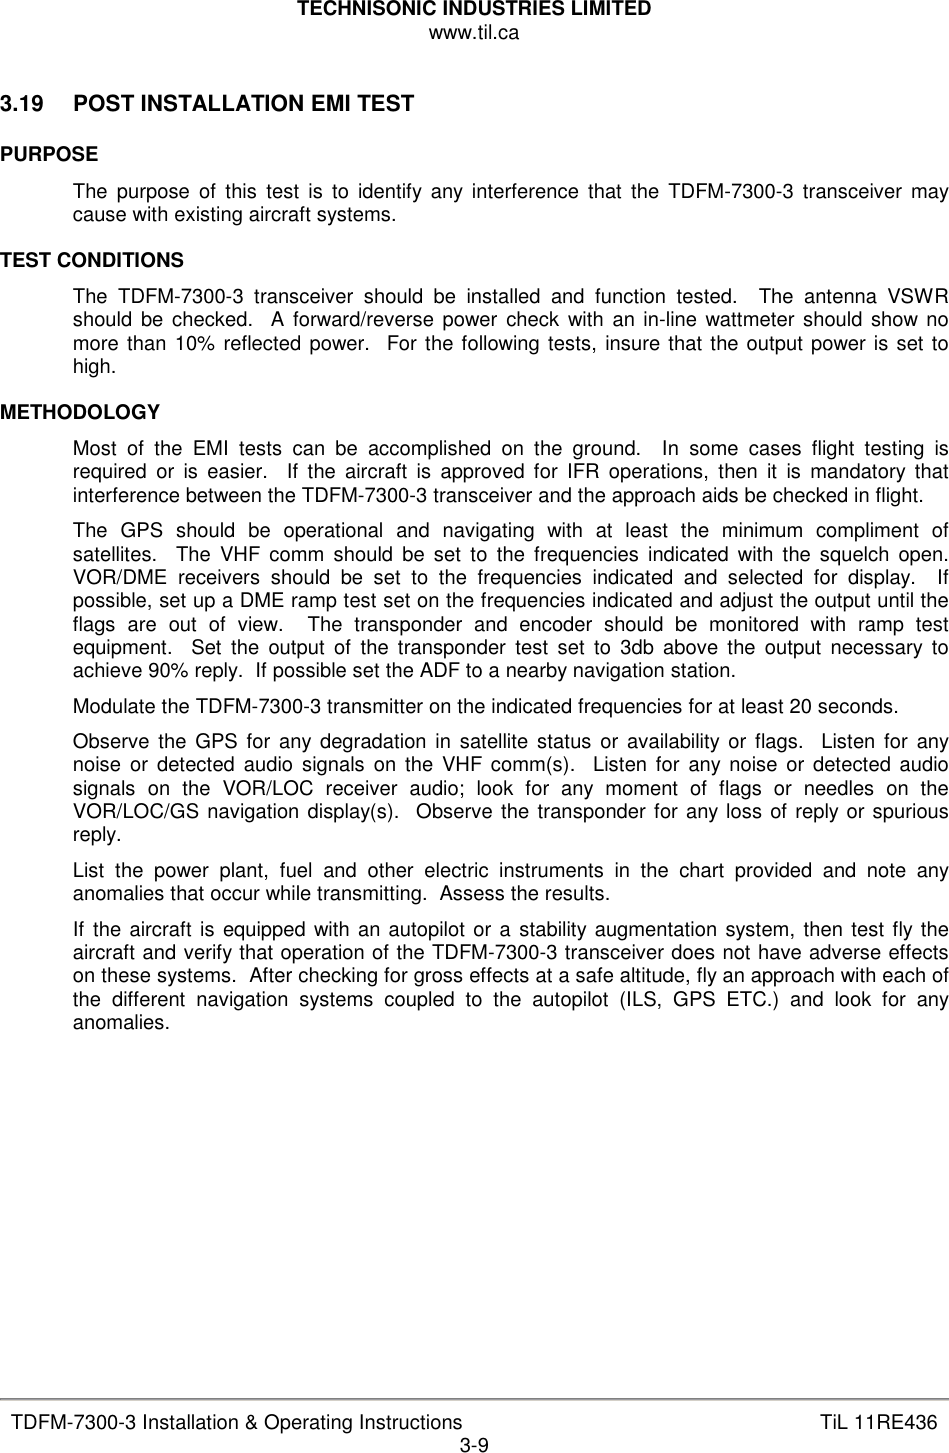 TECHNISONIC INDUSTRIES LIMITED www.til.ca   TDFM-7300-3 Installation &amp; Operating Instructions  TiL 11RE436 3-9  3.19  POST INSTALLATION EMI TEST  PURPOSE The  purpose  of  this  test  is  to  identify any interference  that  the  TDFM-7300-3  transceiver  may cause with existing aircraft systems.  TEST CONDITIONS The  TDFM-7300-3  transceiver  should  be  installed  and  function  tested.    The  antenna  VSWR should  be  checked.    A forward/reverse power check  with  an in-line wattmeter  should show no more than 10% reflected power.  For the following tests, insure that the output power is set to high.  METHODOLOGY Most  of  the  EMI  tests  can  be  accomplished  on  the  ground.    In  some  cases  flight  testing  is required  or  is  easier.    If  the  aircraft  is  approved  for  IFR  operations,  then  it  is  mandatory  that interference between the TDFM-7300-3 transceiver and the approach aids be checked in flight. The  GPS  should  be  operational  and  navigating  with  at  least  the  minimum  compliment  of satellites.    The  VHF  comm  should  be  set  to  the  frequencies  indicated with  the  squelch  open. VOR/DME  receivers  should  be  set  to  the  frequencies  indicated  and  selected  for  display.    If possible, set up a DME ramp test set on the frequencies indicated and adjust the output until the flags  are  out  of  view.    The  transponder  and  encoder  should  be  monitored  with  ramp  test equipment.    Set  the  output  of  the  transponder  test  set  to  3db  above  the  output  necessary  to achieve 90% reply.  If possible set the ADF to a nearby navigation station. Modulate the TDFM-7300-3 transmitter on the indicated frequencies for at least 20 seconds. Observe  the GPS  for  any degradation  in  satellite  status  or availability or  flags.    Listen for any noise  or  detected  audio signals  on the  VHF comm(s).    Listen for  any noise or  detected  audio signals  on  the  VOR/LOC  receiver  audio;  look  for  any  moment  of  flags  or  needles  on  the VOR/LOC/GS navigation display(s).  Observe the transponder for any loss of reply or spurious reply. List  the  power  plant,  fuel  and  other  electric  instruments  in  the  chart  provided  and  note  any anomalies that occur while transmitting.  Assess the results. If the aircraft is equipped with an autopilot or a stability augmentation system,  then test fly the aircraft and verify that operation of the TDFM-7300-3 transceiver does not have adverse effects on these systems.  After checking for gross effects at a safe altitude, fly an approach with each of the  different  navigation  systems  coupled  to  the  autopilot  (ILS,  GPS  ETC.)  and  look  for  any anomalies.           